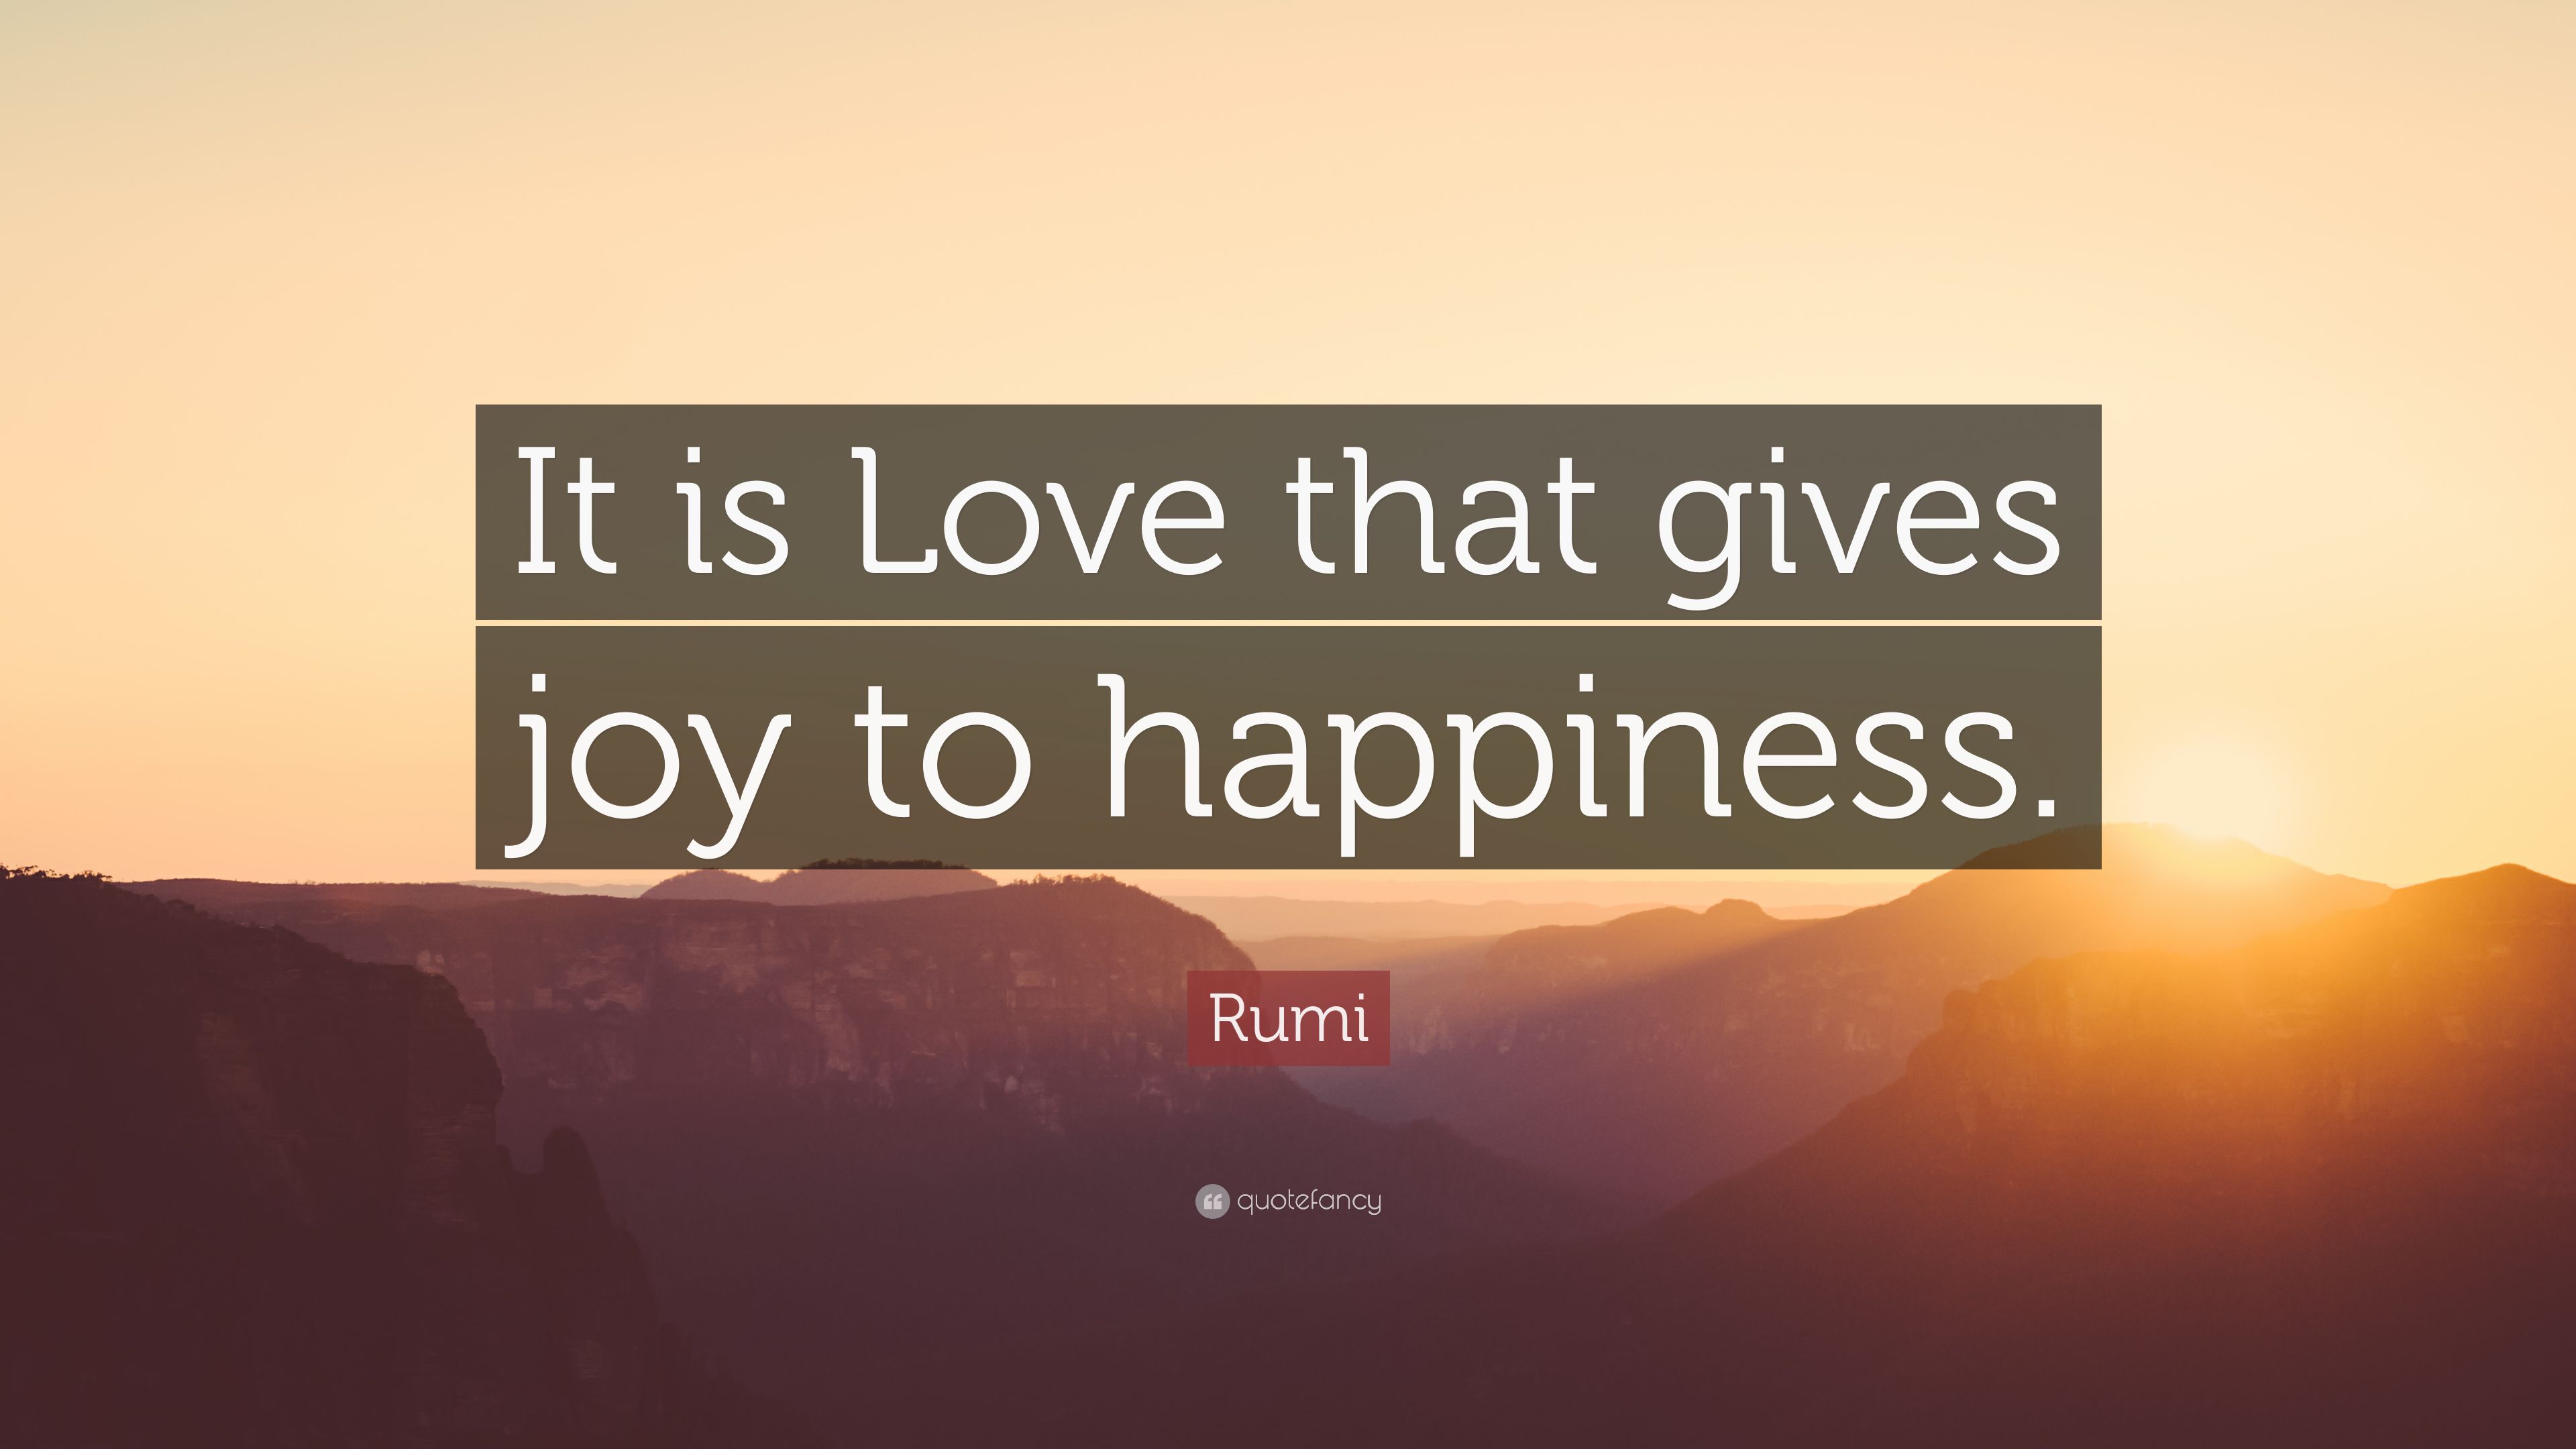 Rumi Quote: “It is Love that gives joy to happiness.” 7